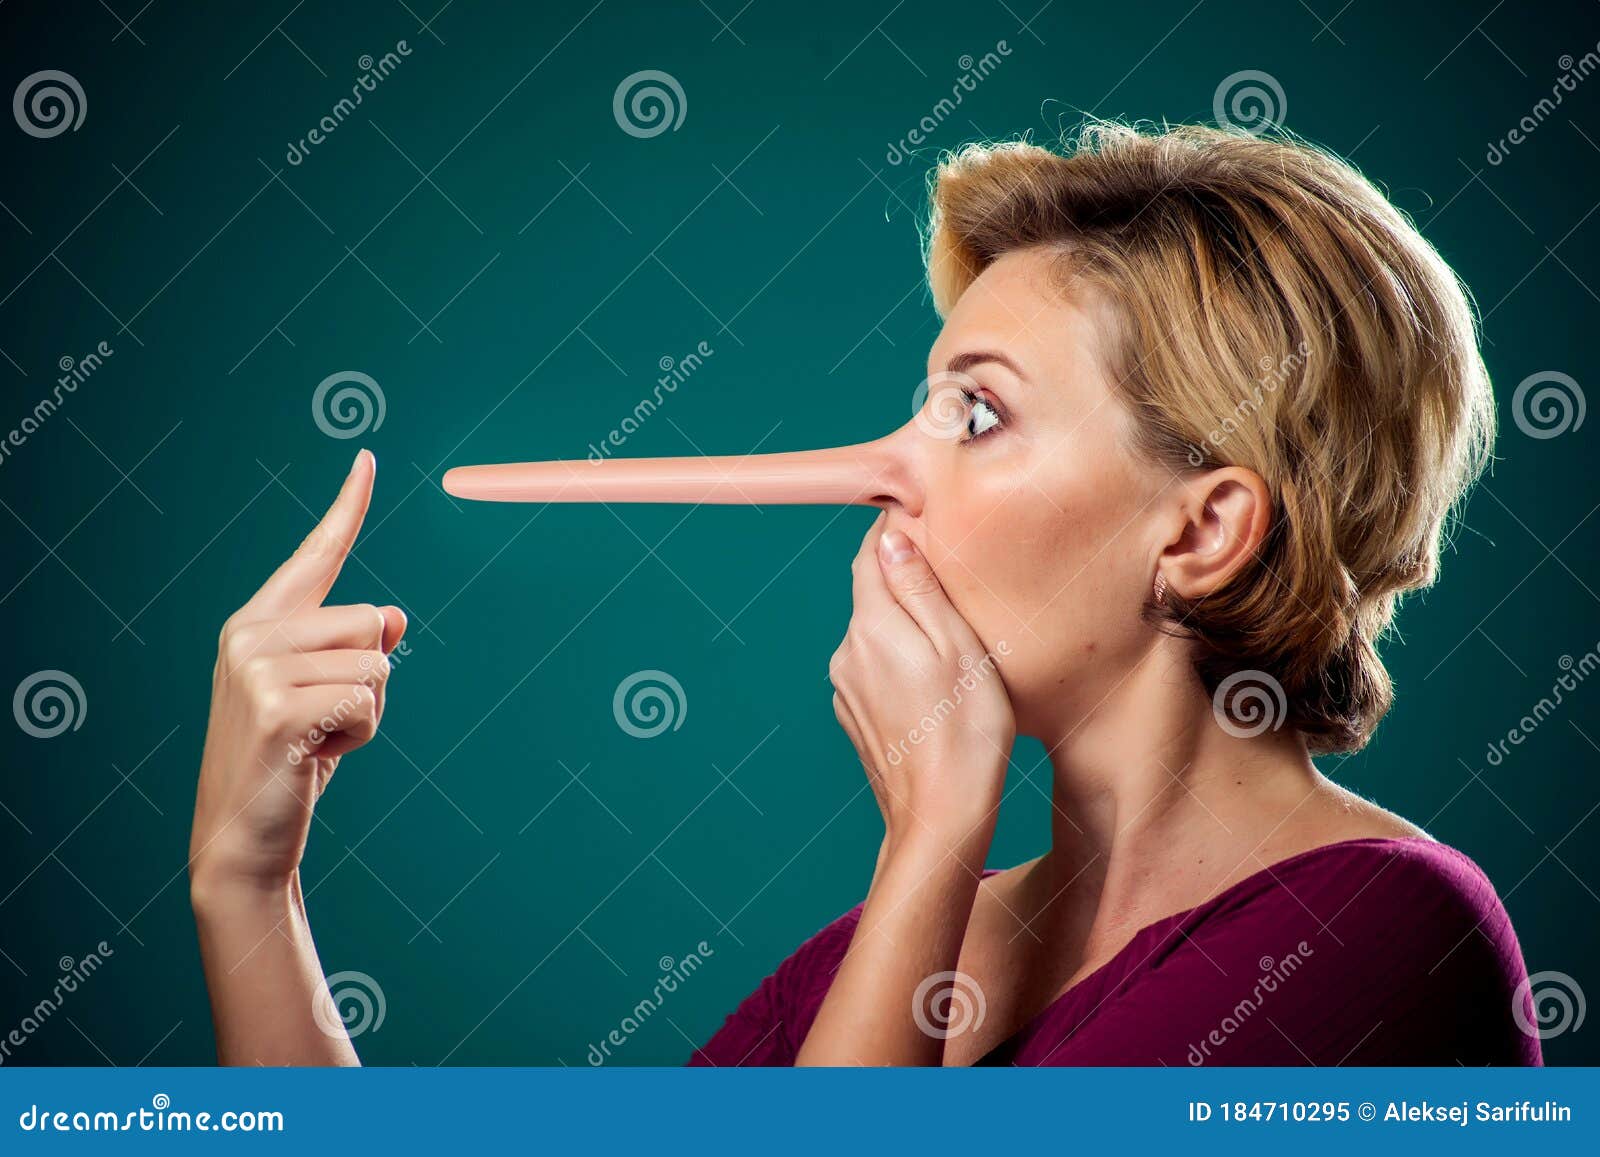 woman touching her long nose because of lie . people,lifestyle and emotions concept